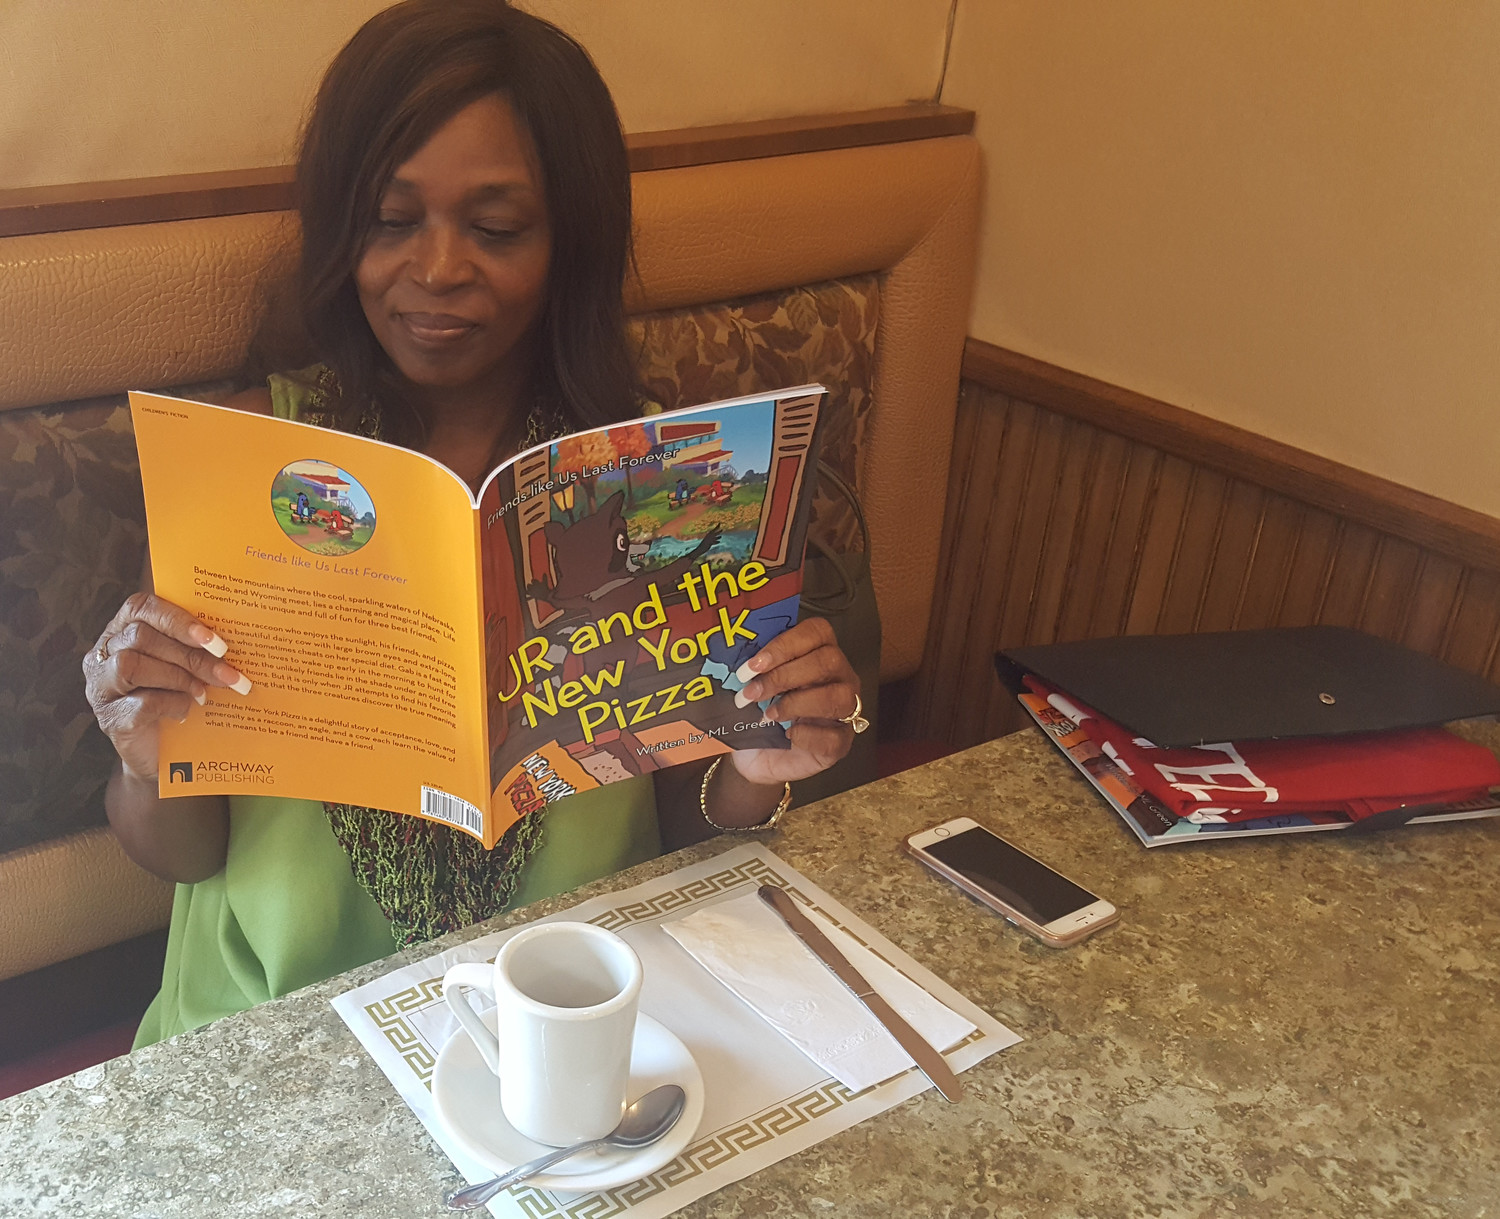 Freeport author ML Green leisurely read her new book, “JR and the New York Pizza” and planning to host more readings for children in Long Island.